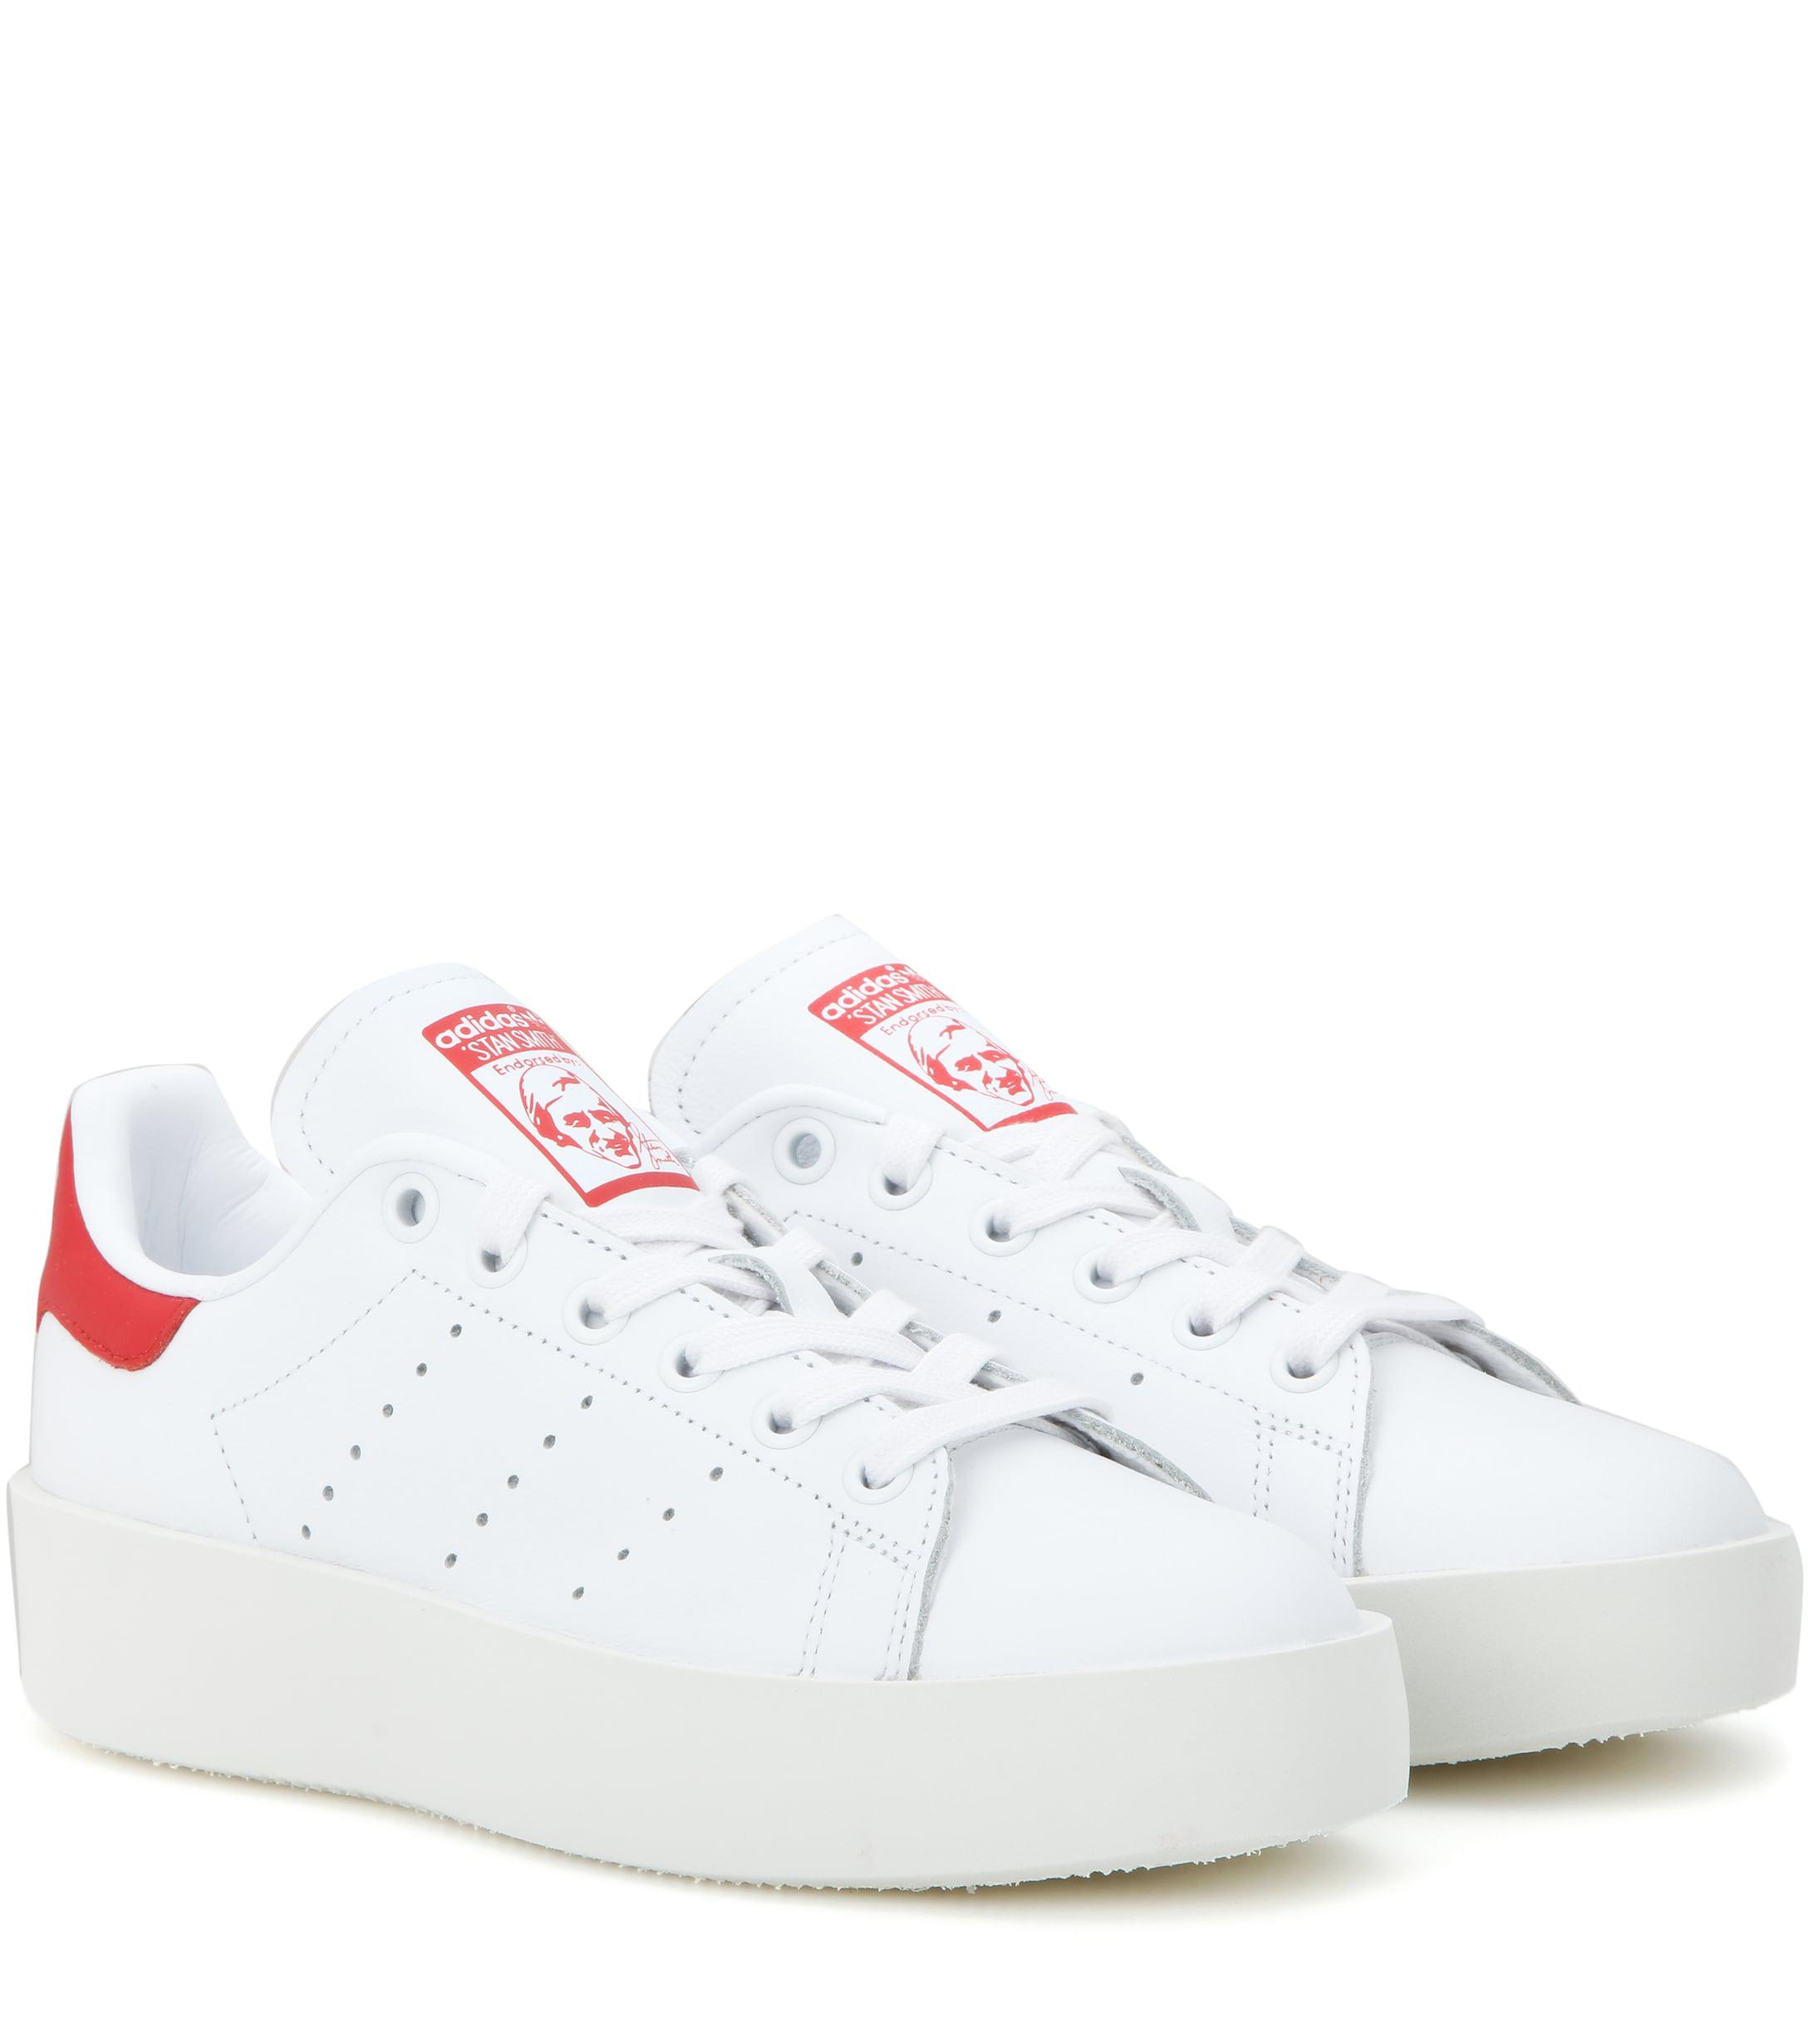 adidas stan smith bold red, super buy Save 62% available -  gulfharborinsurance.com